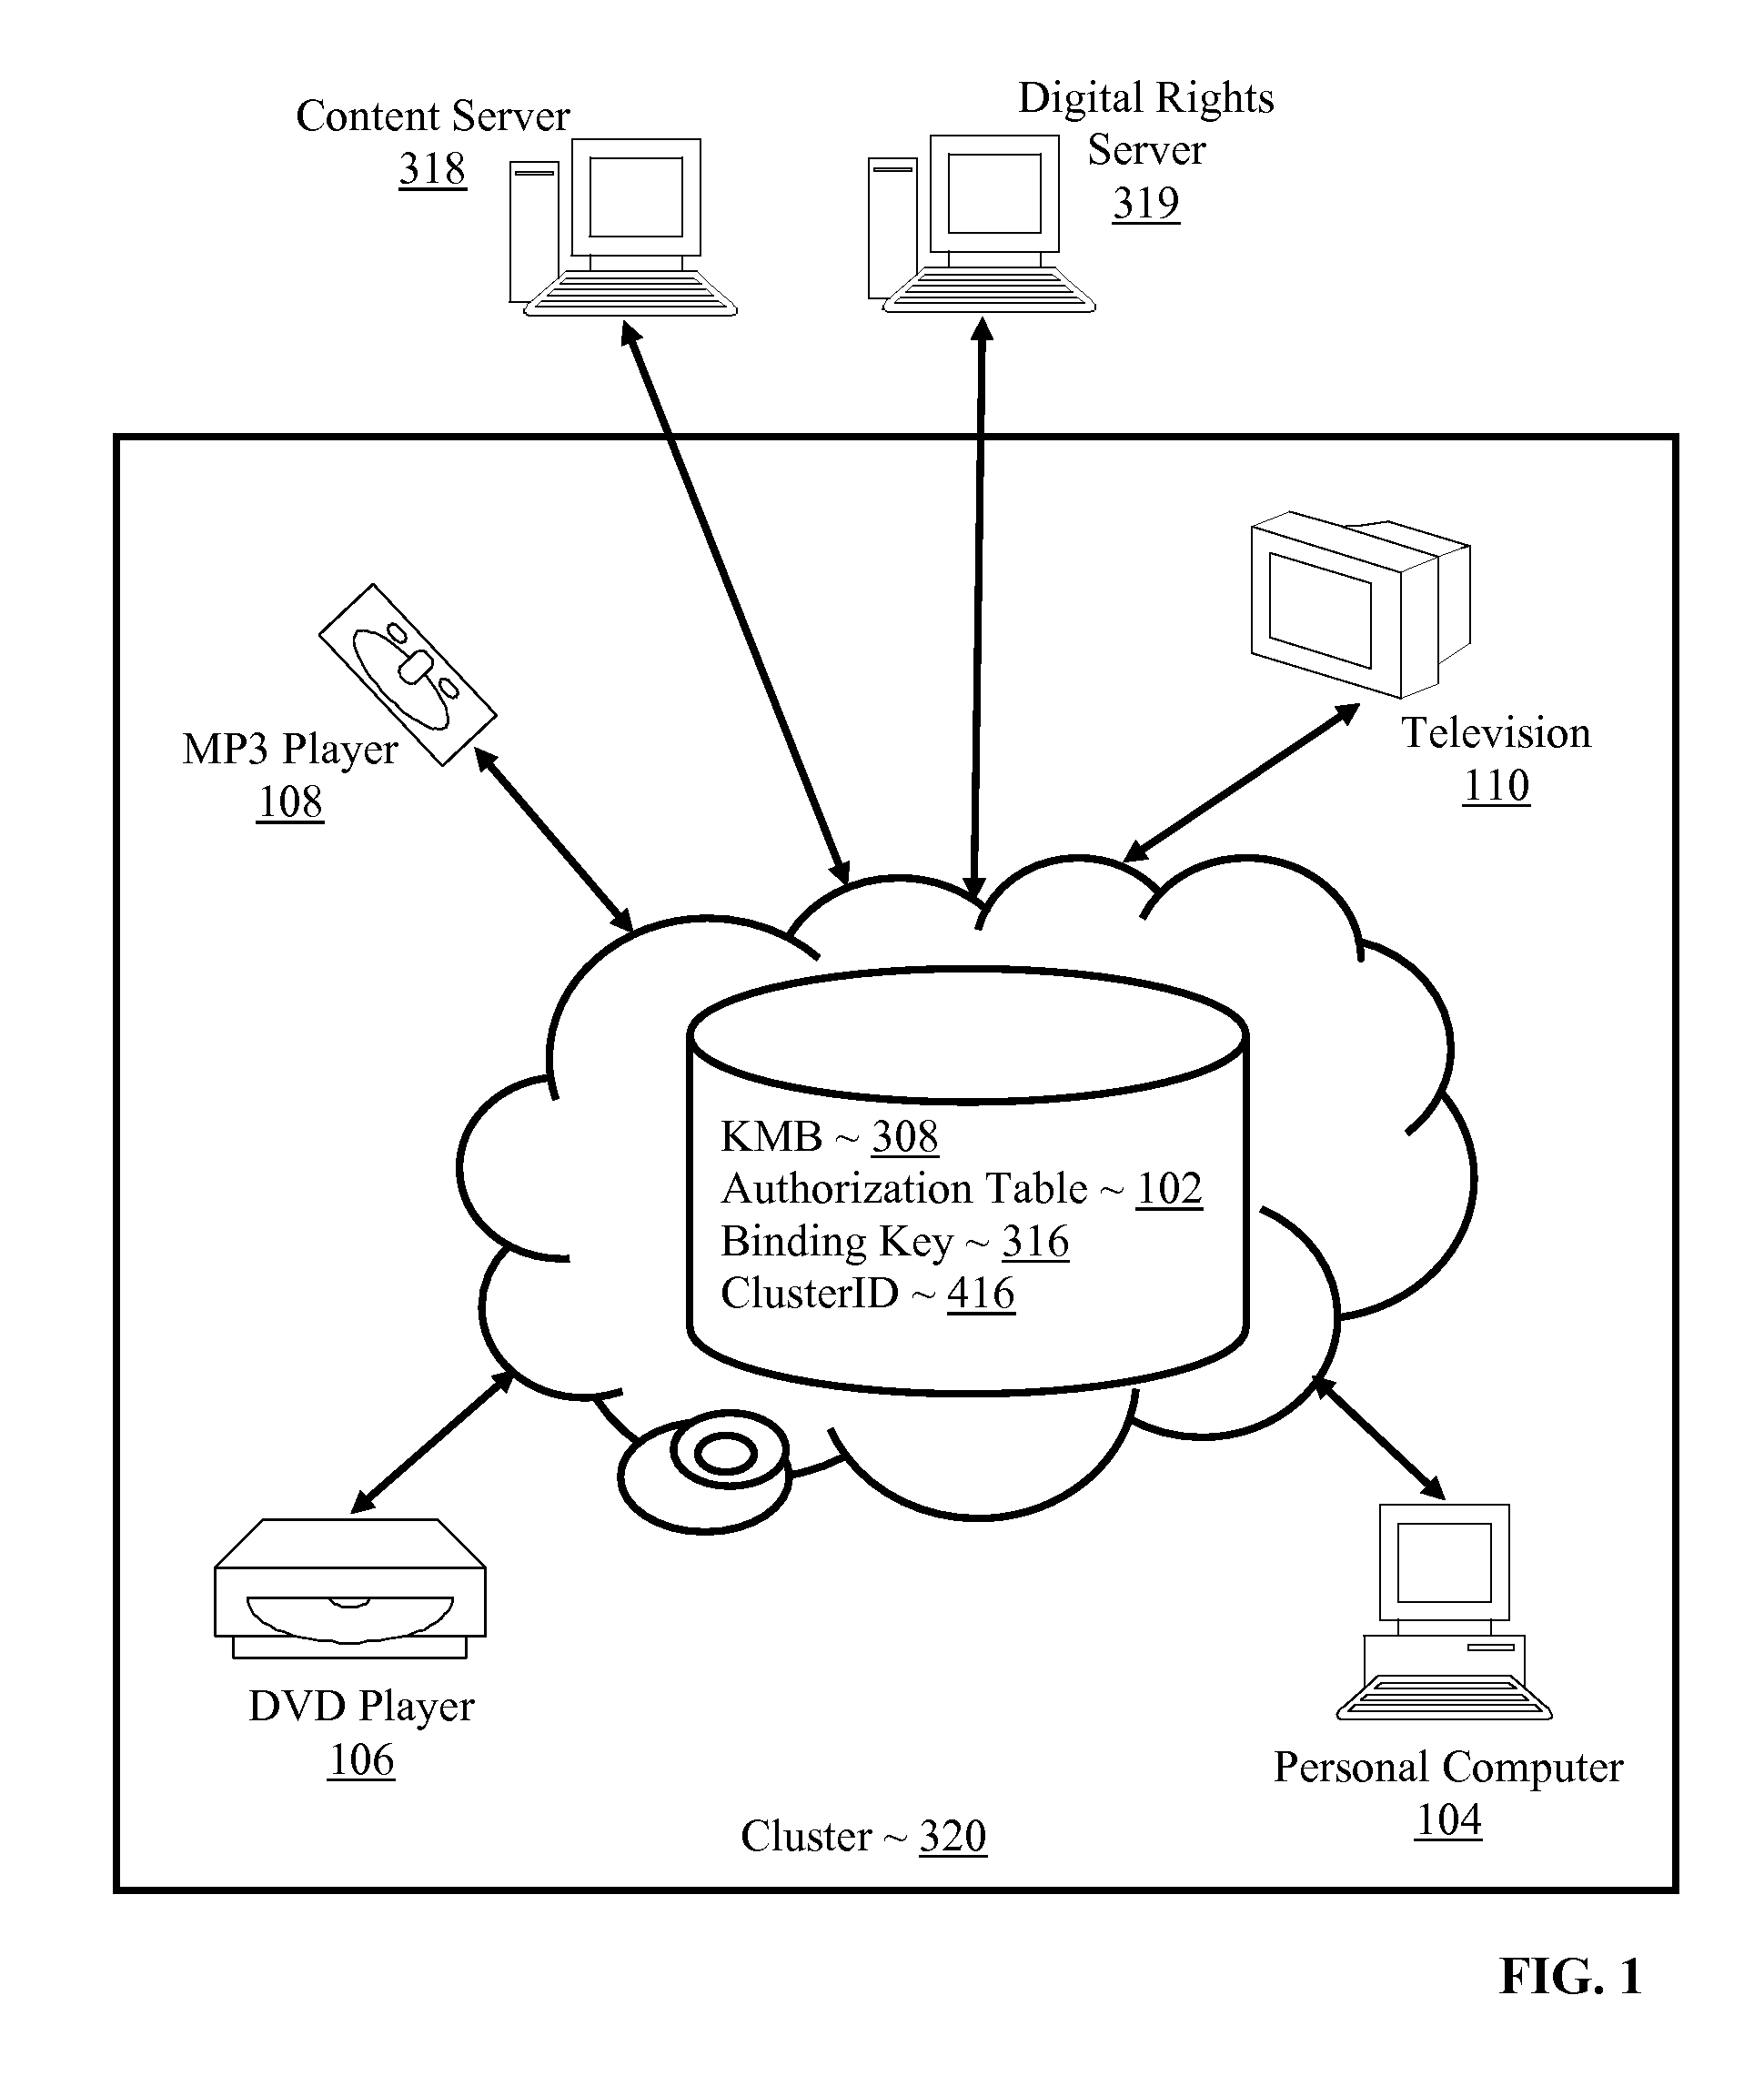 Controlling With Rights Objects Delivery Of Broadcast Encryption Content For A Network Cluster From A Content Server Outside The Cluster